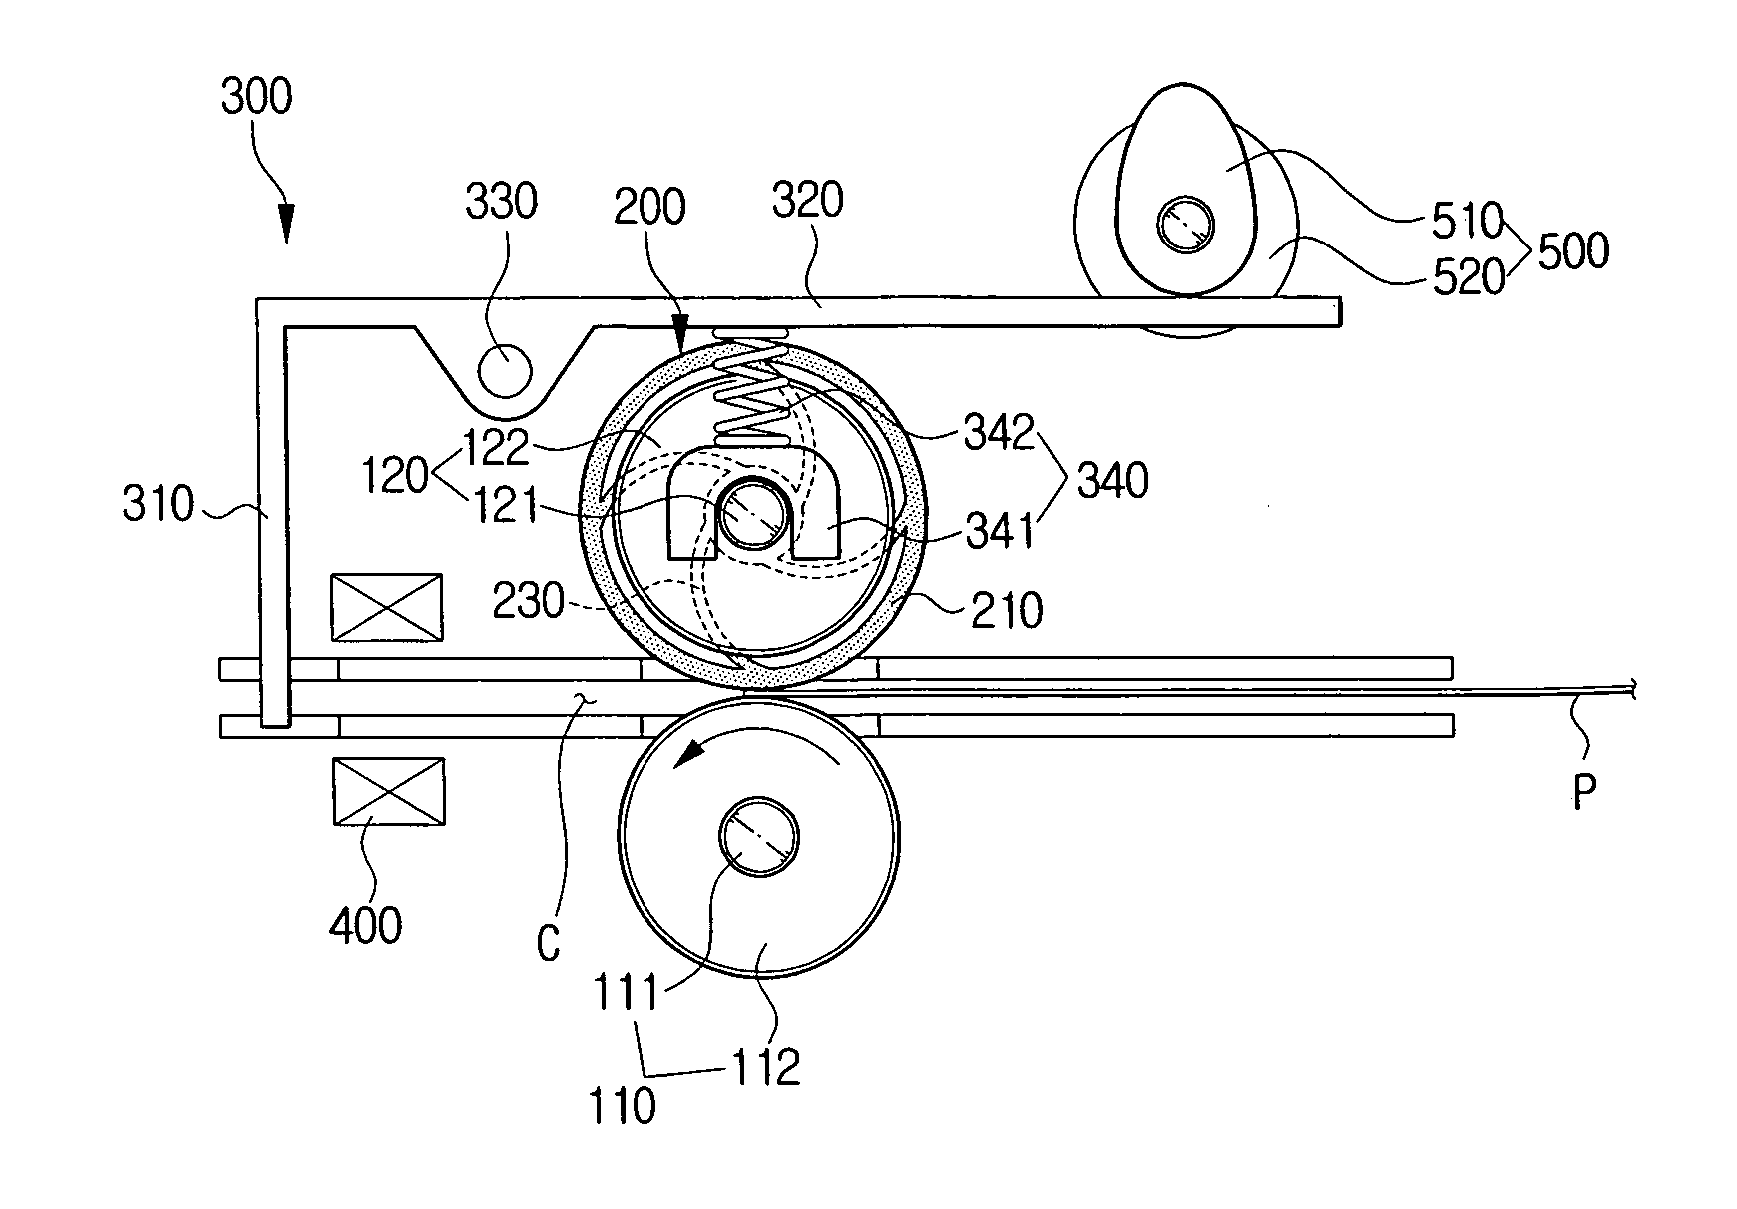 Paper feeding apparatus for image forming apparatus